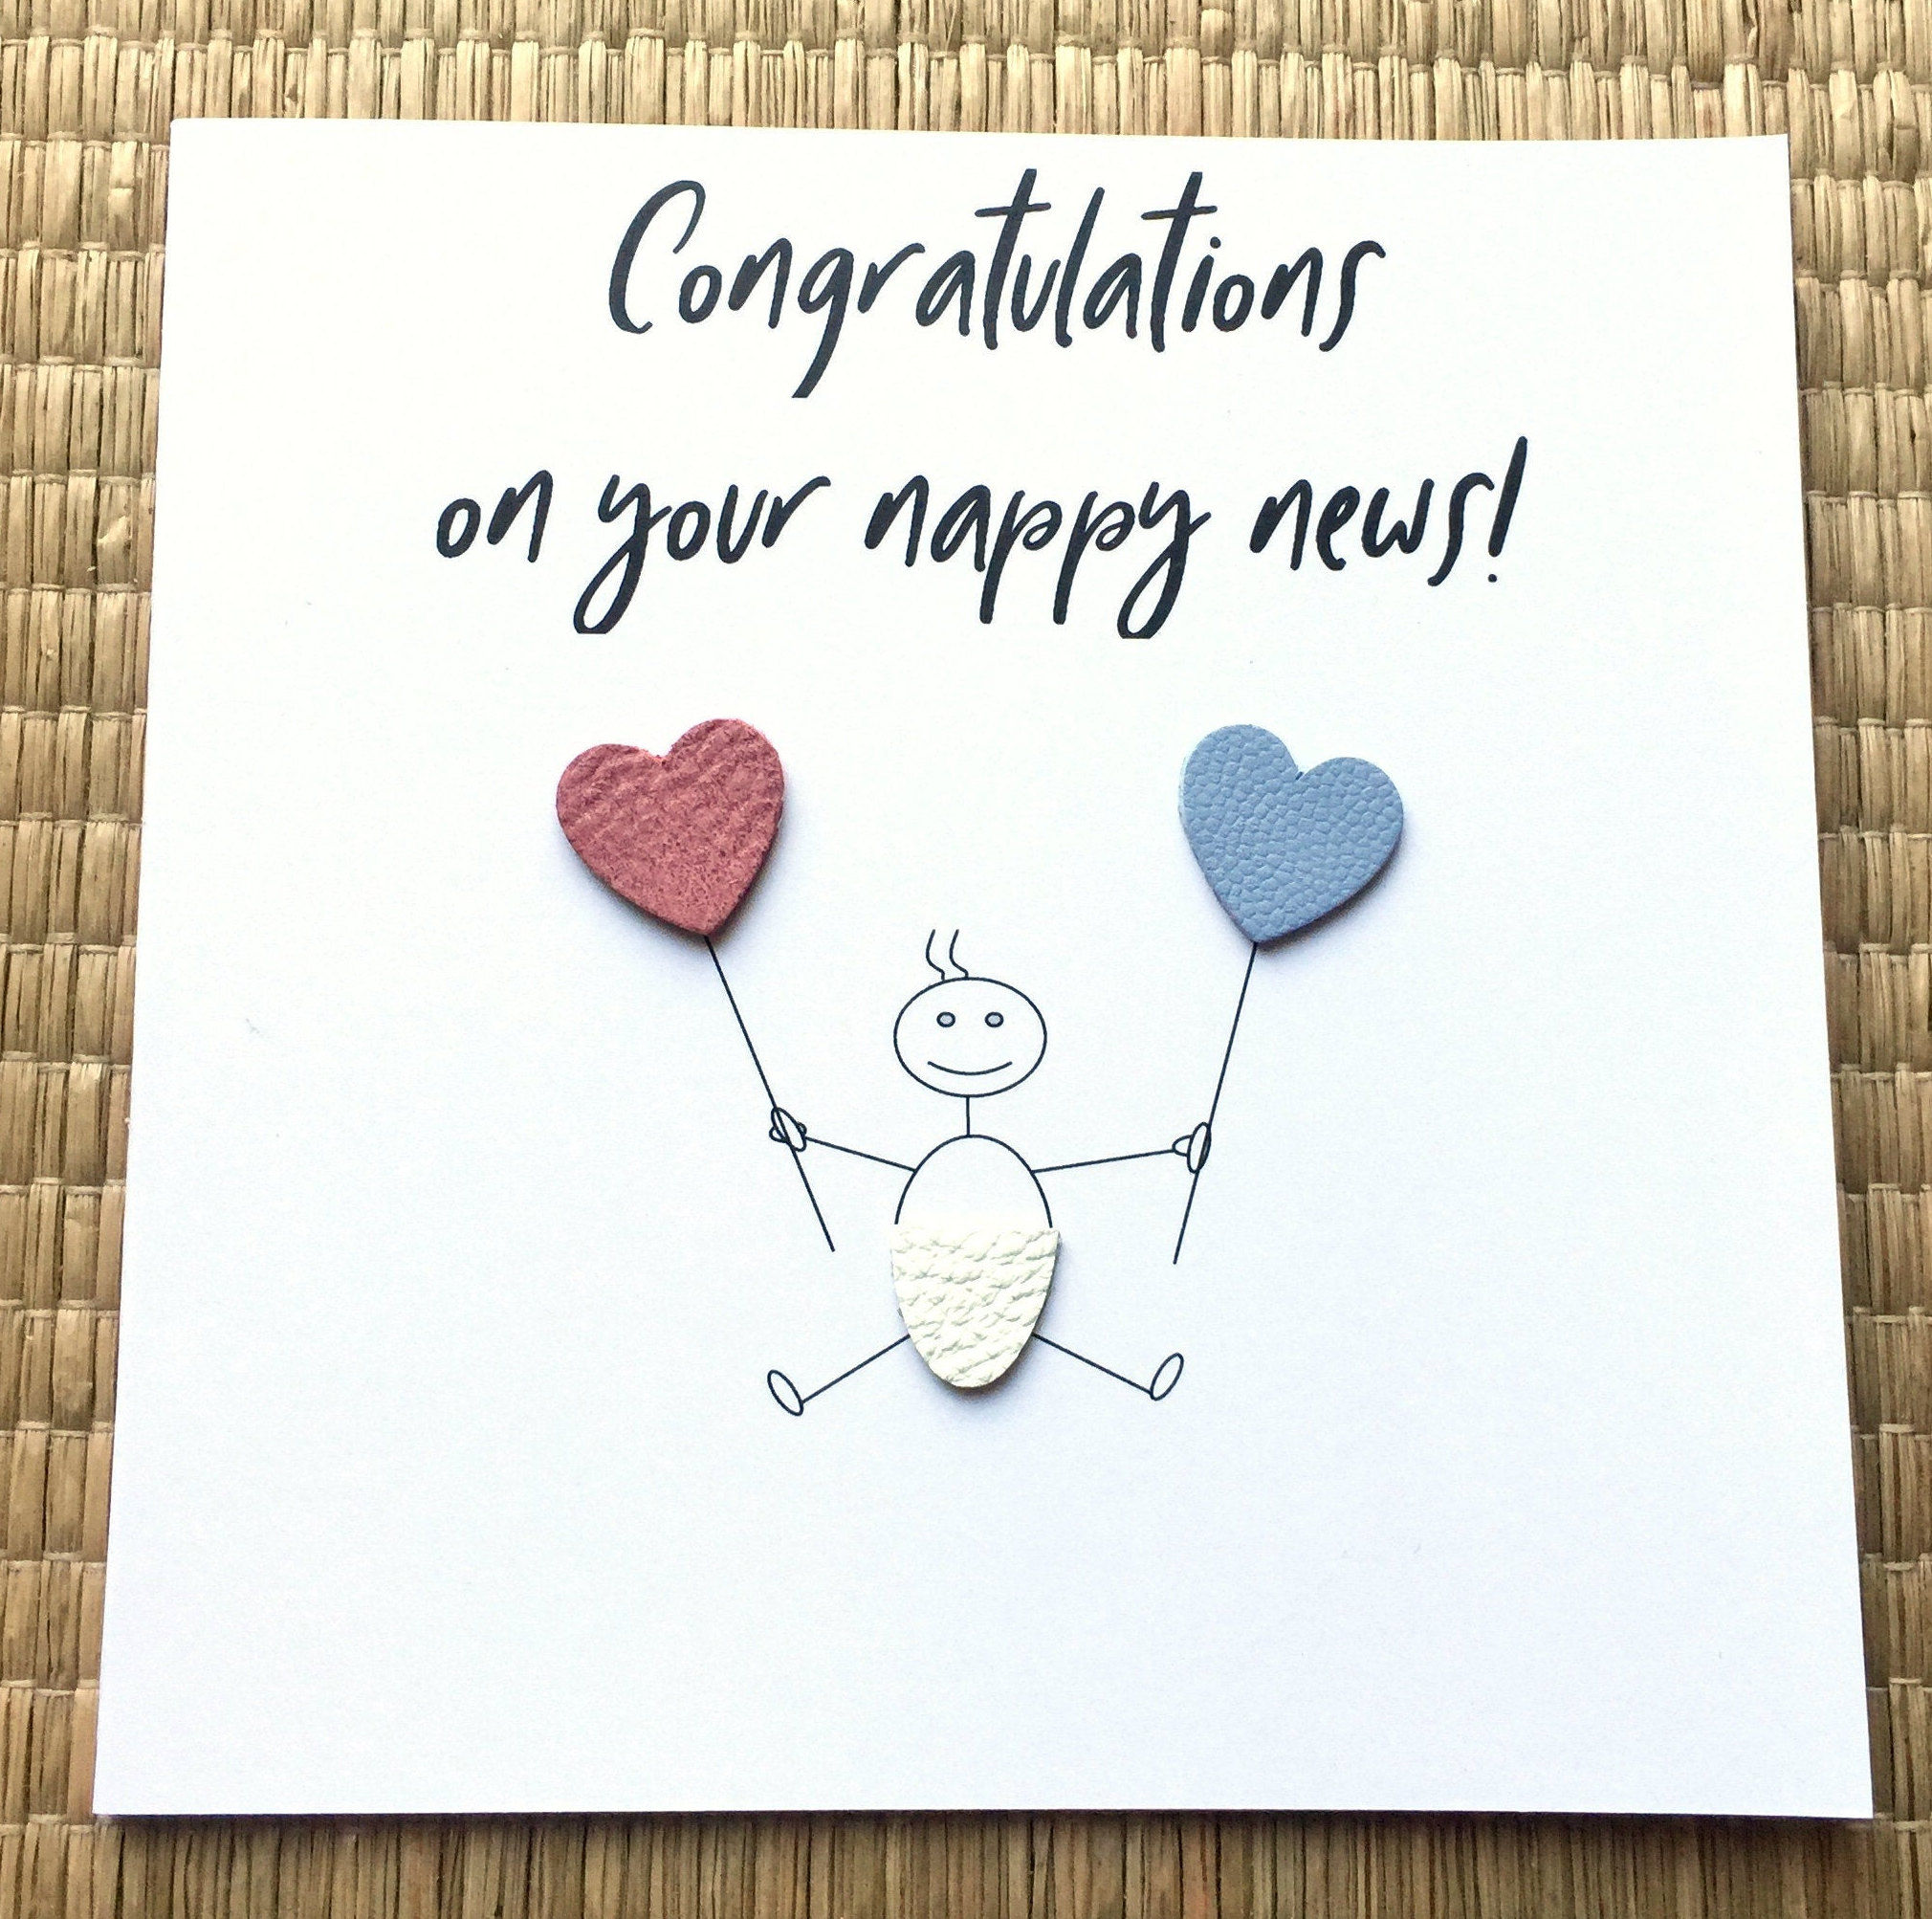 pregnancy-congratulations-card-nappy-news-new-arrival-due-expecting